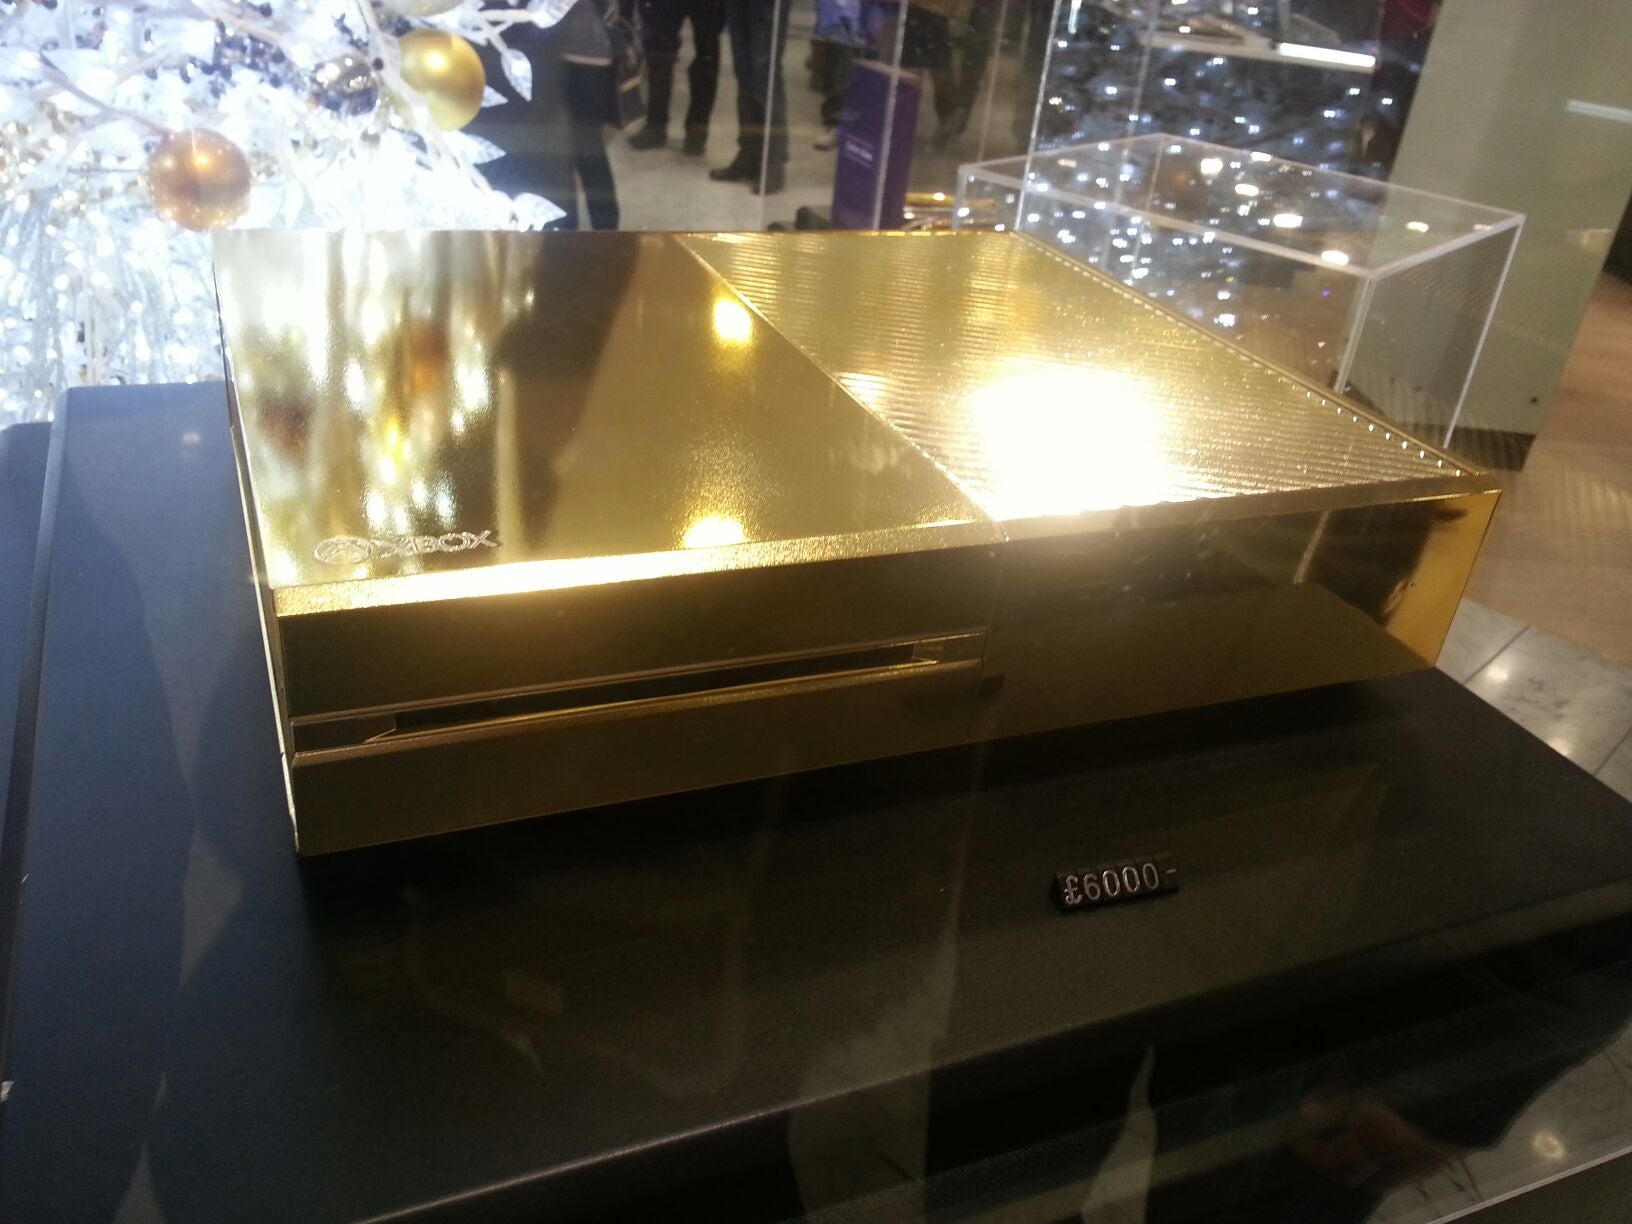 The gold-plated Xbox as spotted by Reddit user SirShyn.